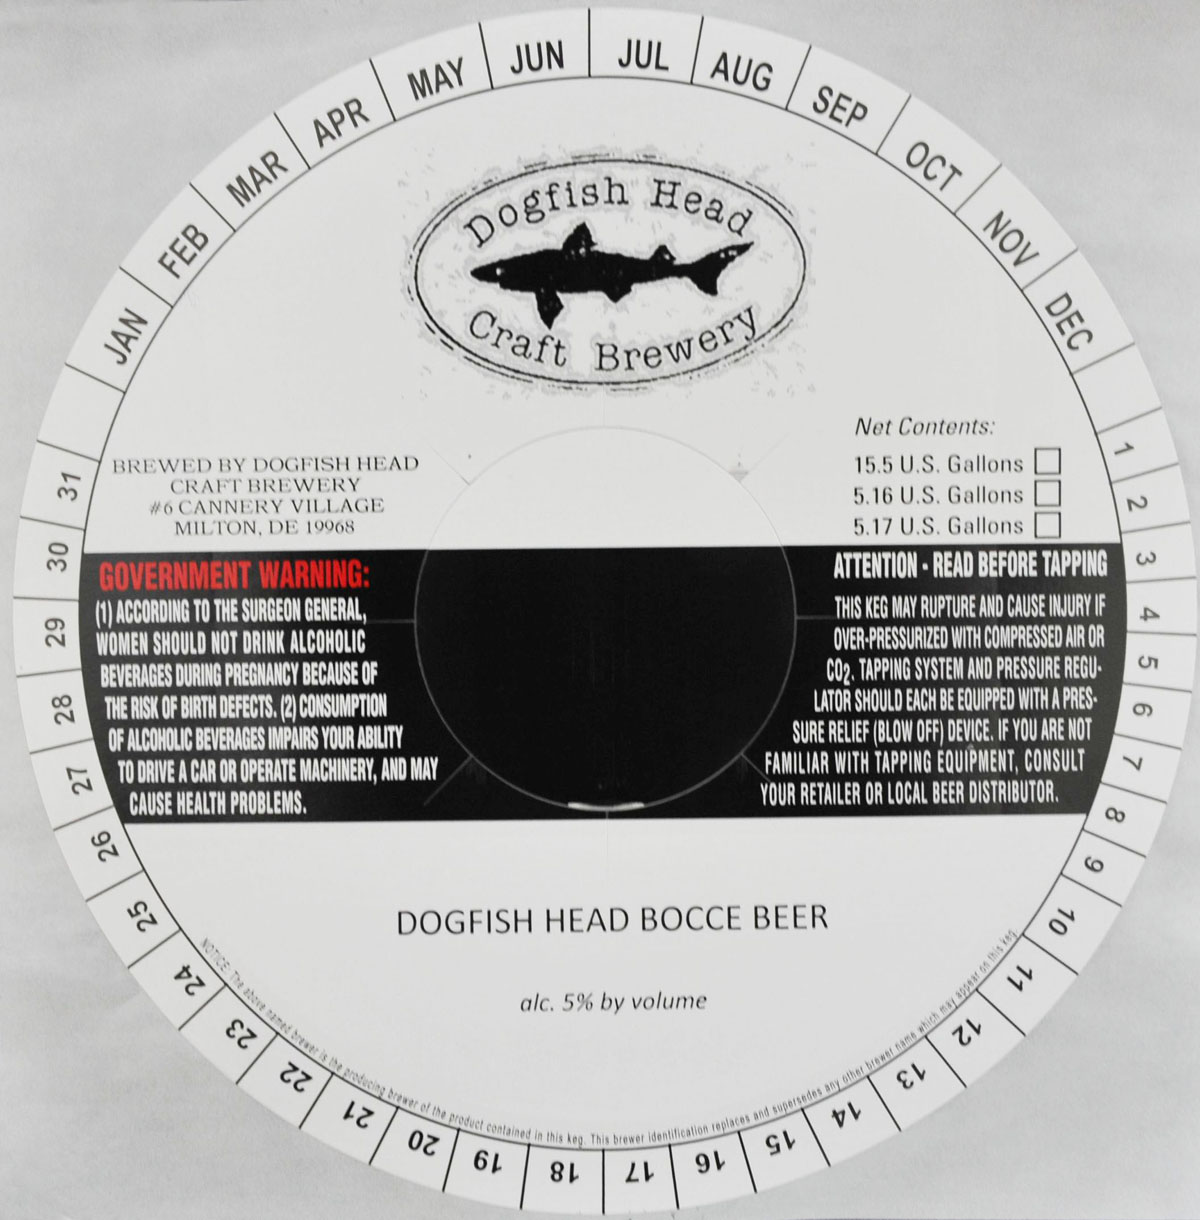 Dogfish Head Bocce Beer